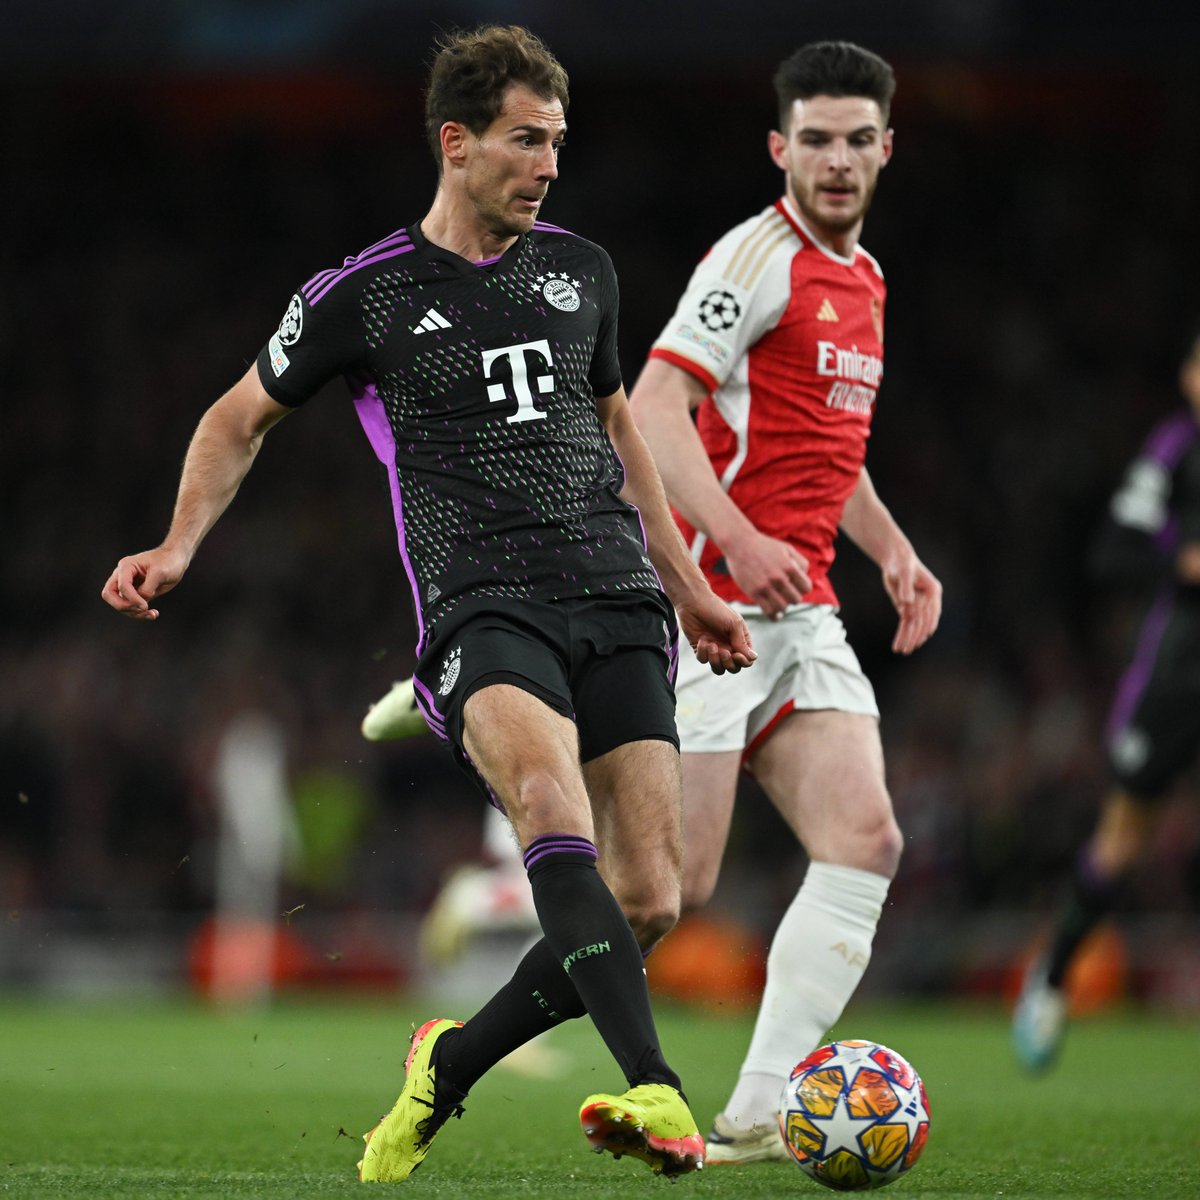 🔎 | FOCUS Leon Goretzka v Arsenal: 👌 37 touches 🅰️ 1 assist 🎁 1 big chance created 👟 21/23 accurate passes (0.42 xA) ⚔️ 3/5 duels won ⛔️ 3 blocked shots (most) 🦵 2 tackles 📈 7.7 Sofascore Rating Bayern's midfield machine is our #ARSFCB Player of the Match! 💪 #UCL